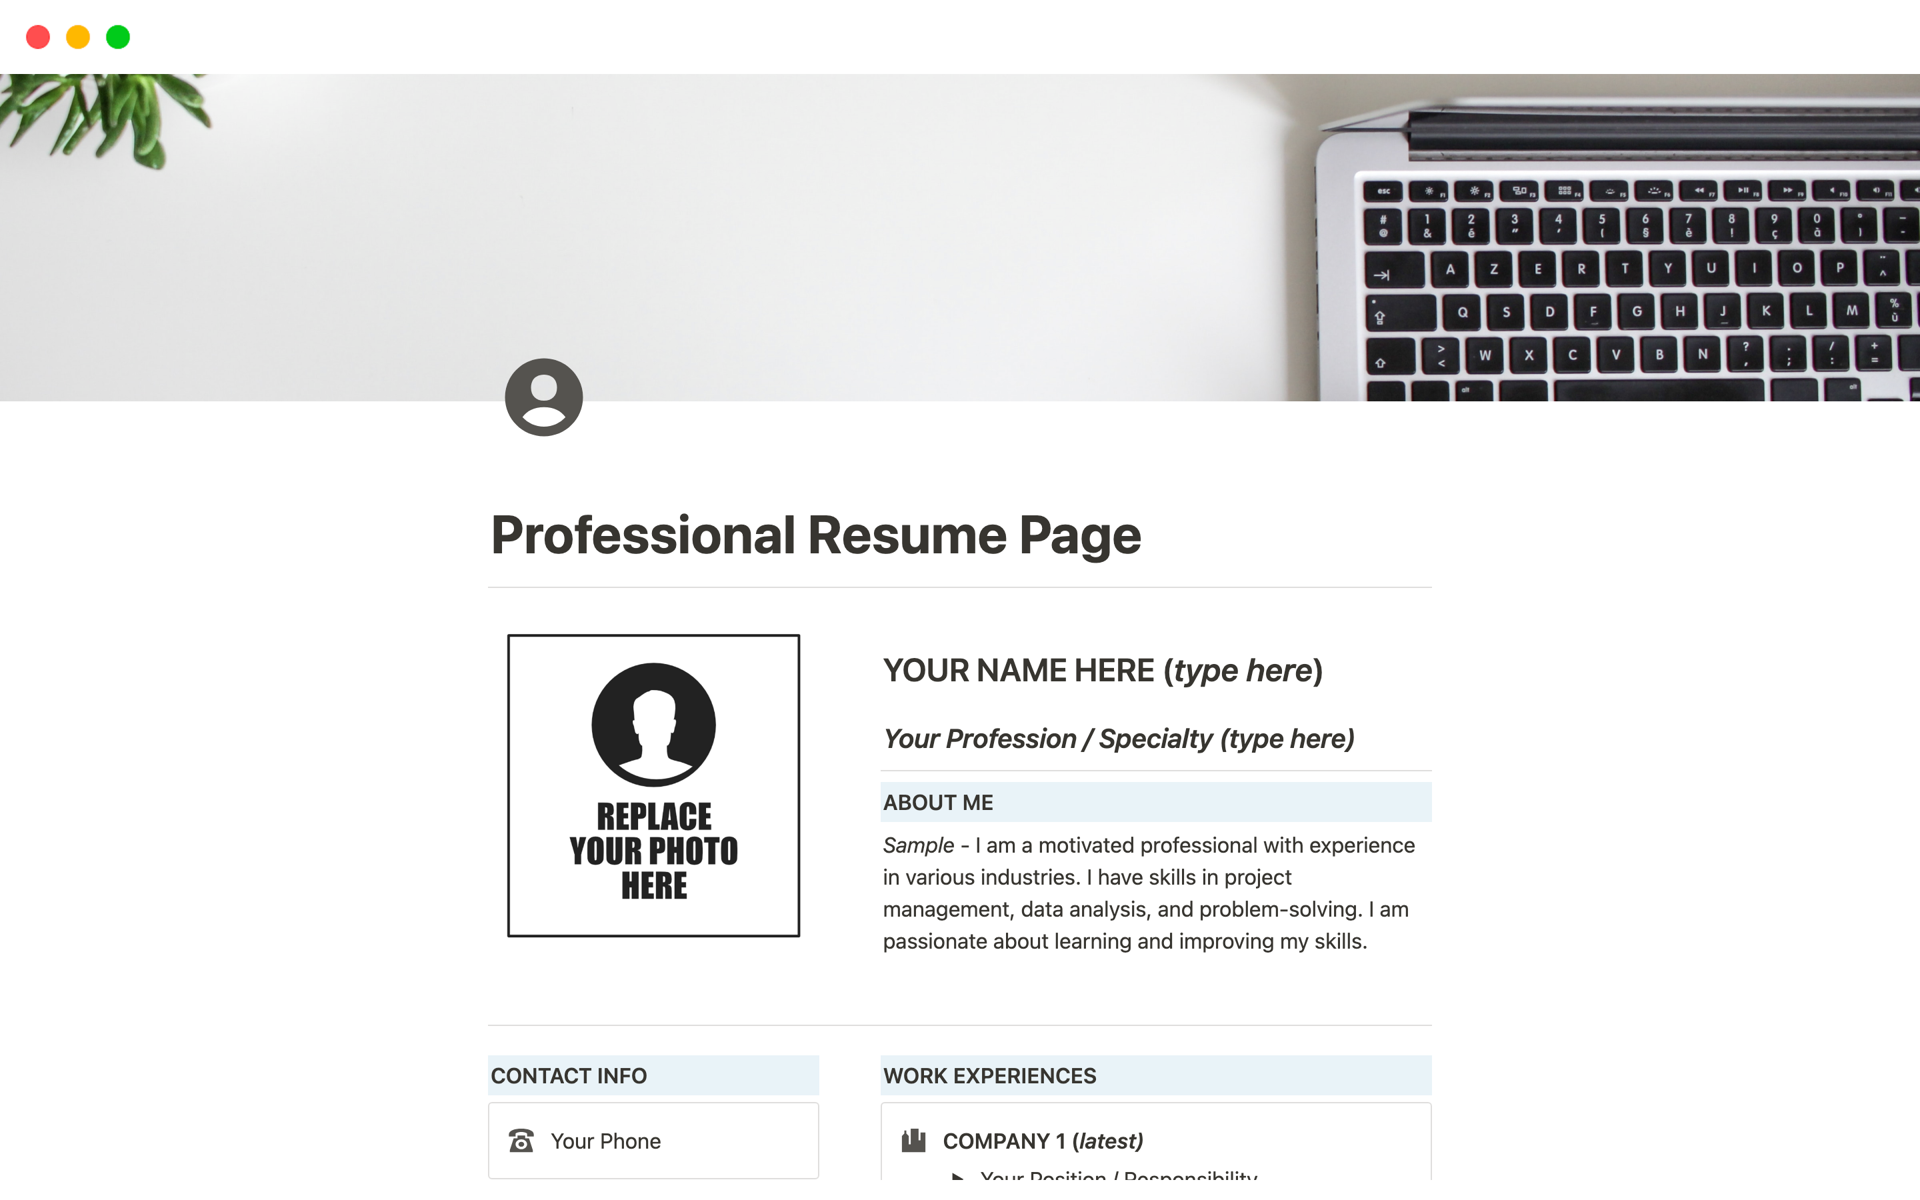 Create Your Own Professional Resume Page with Notion